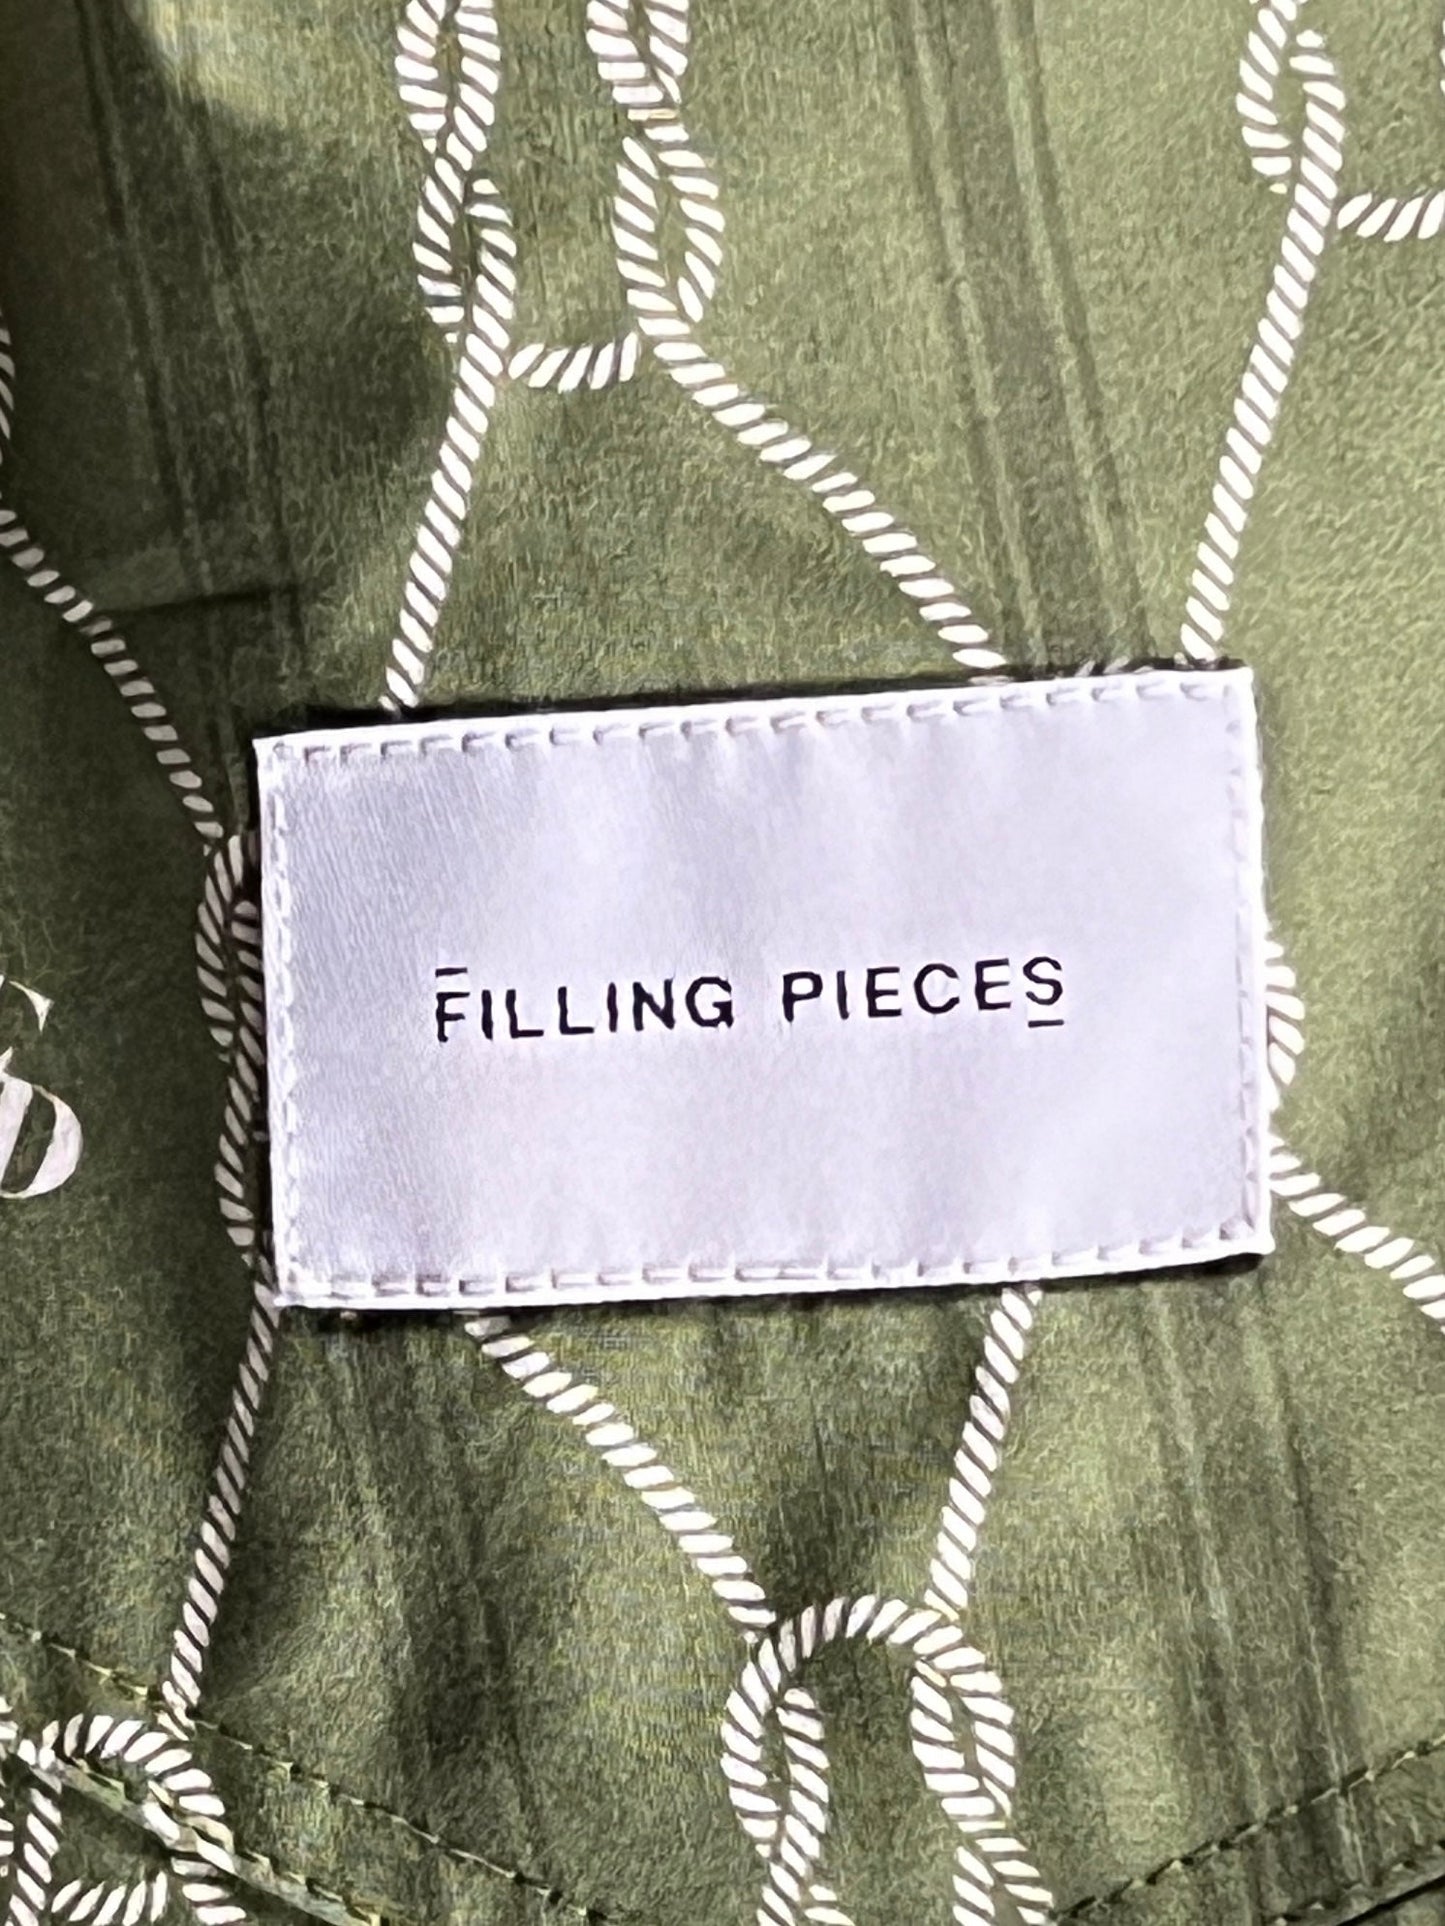 A clothing label with the text "FILLING PIECES" sewn onto FILLING PIECES RESORT MONOGRAM SHORT OLIVE shorts featuring an all-over print on 100% Organic Cotton fabric.